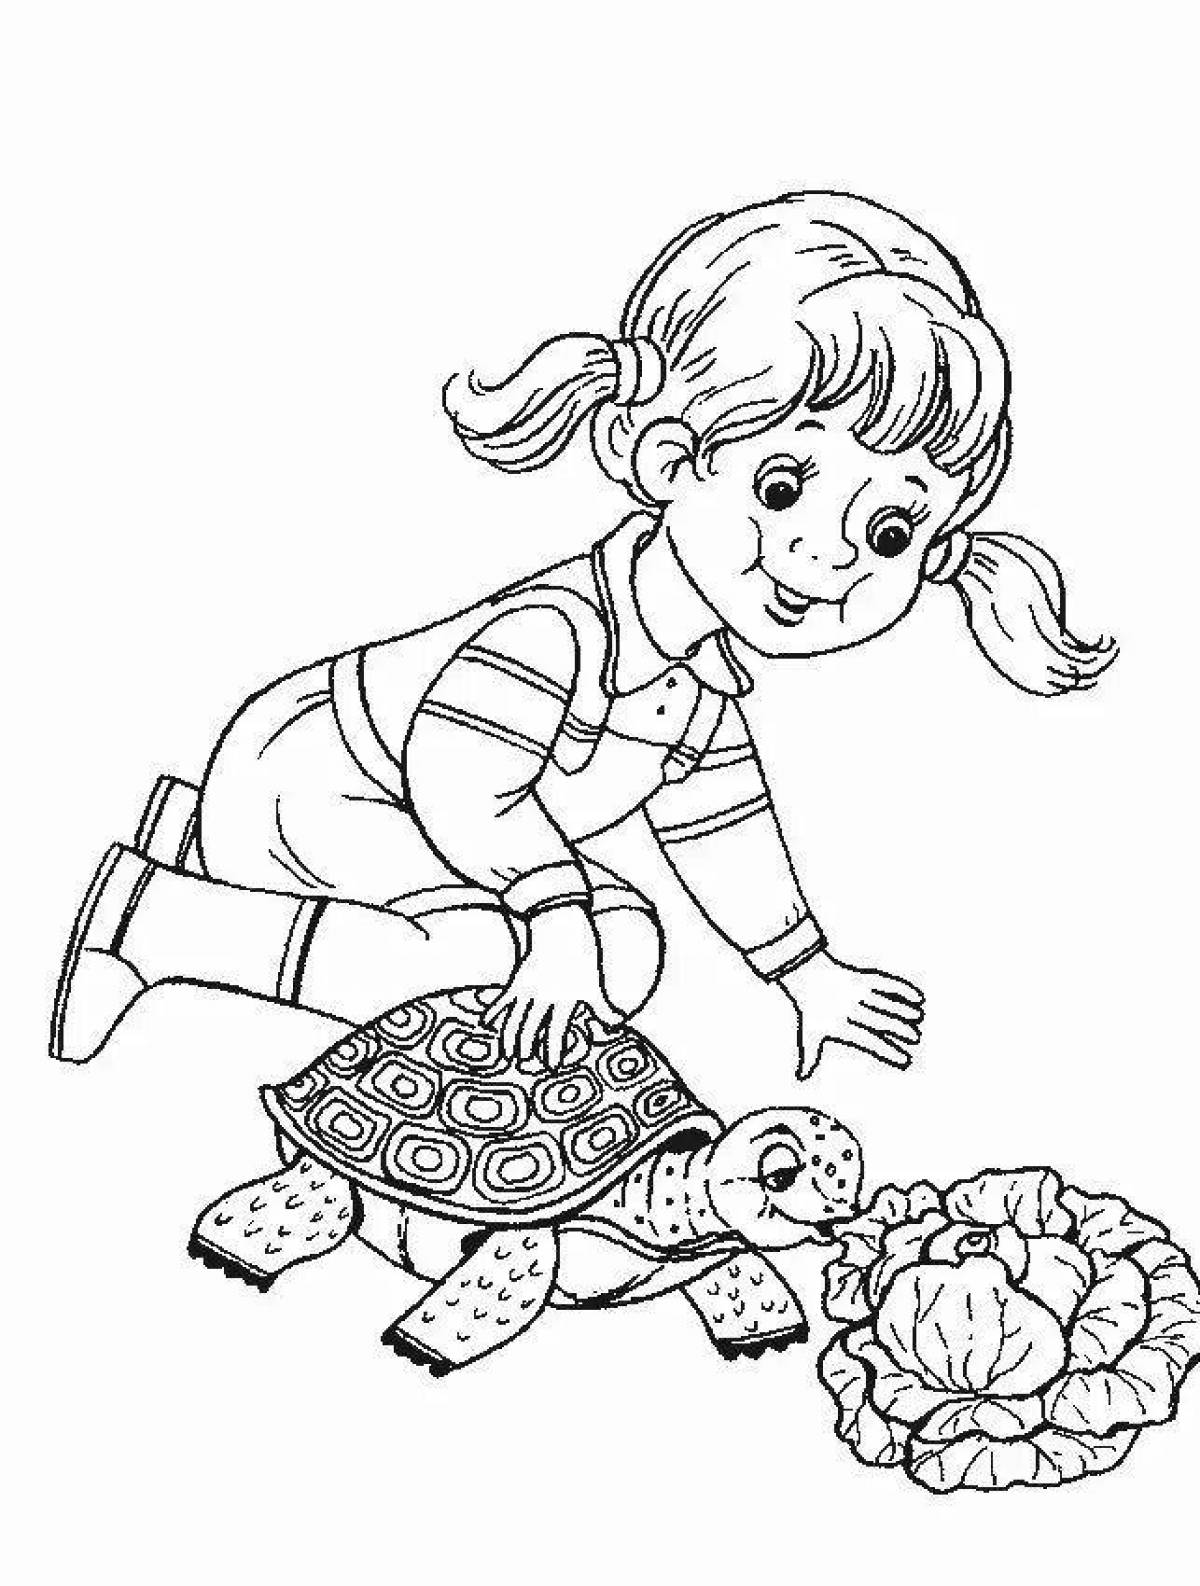 Coloring page majestic good deeds